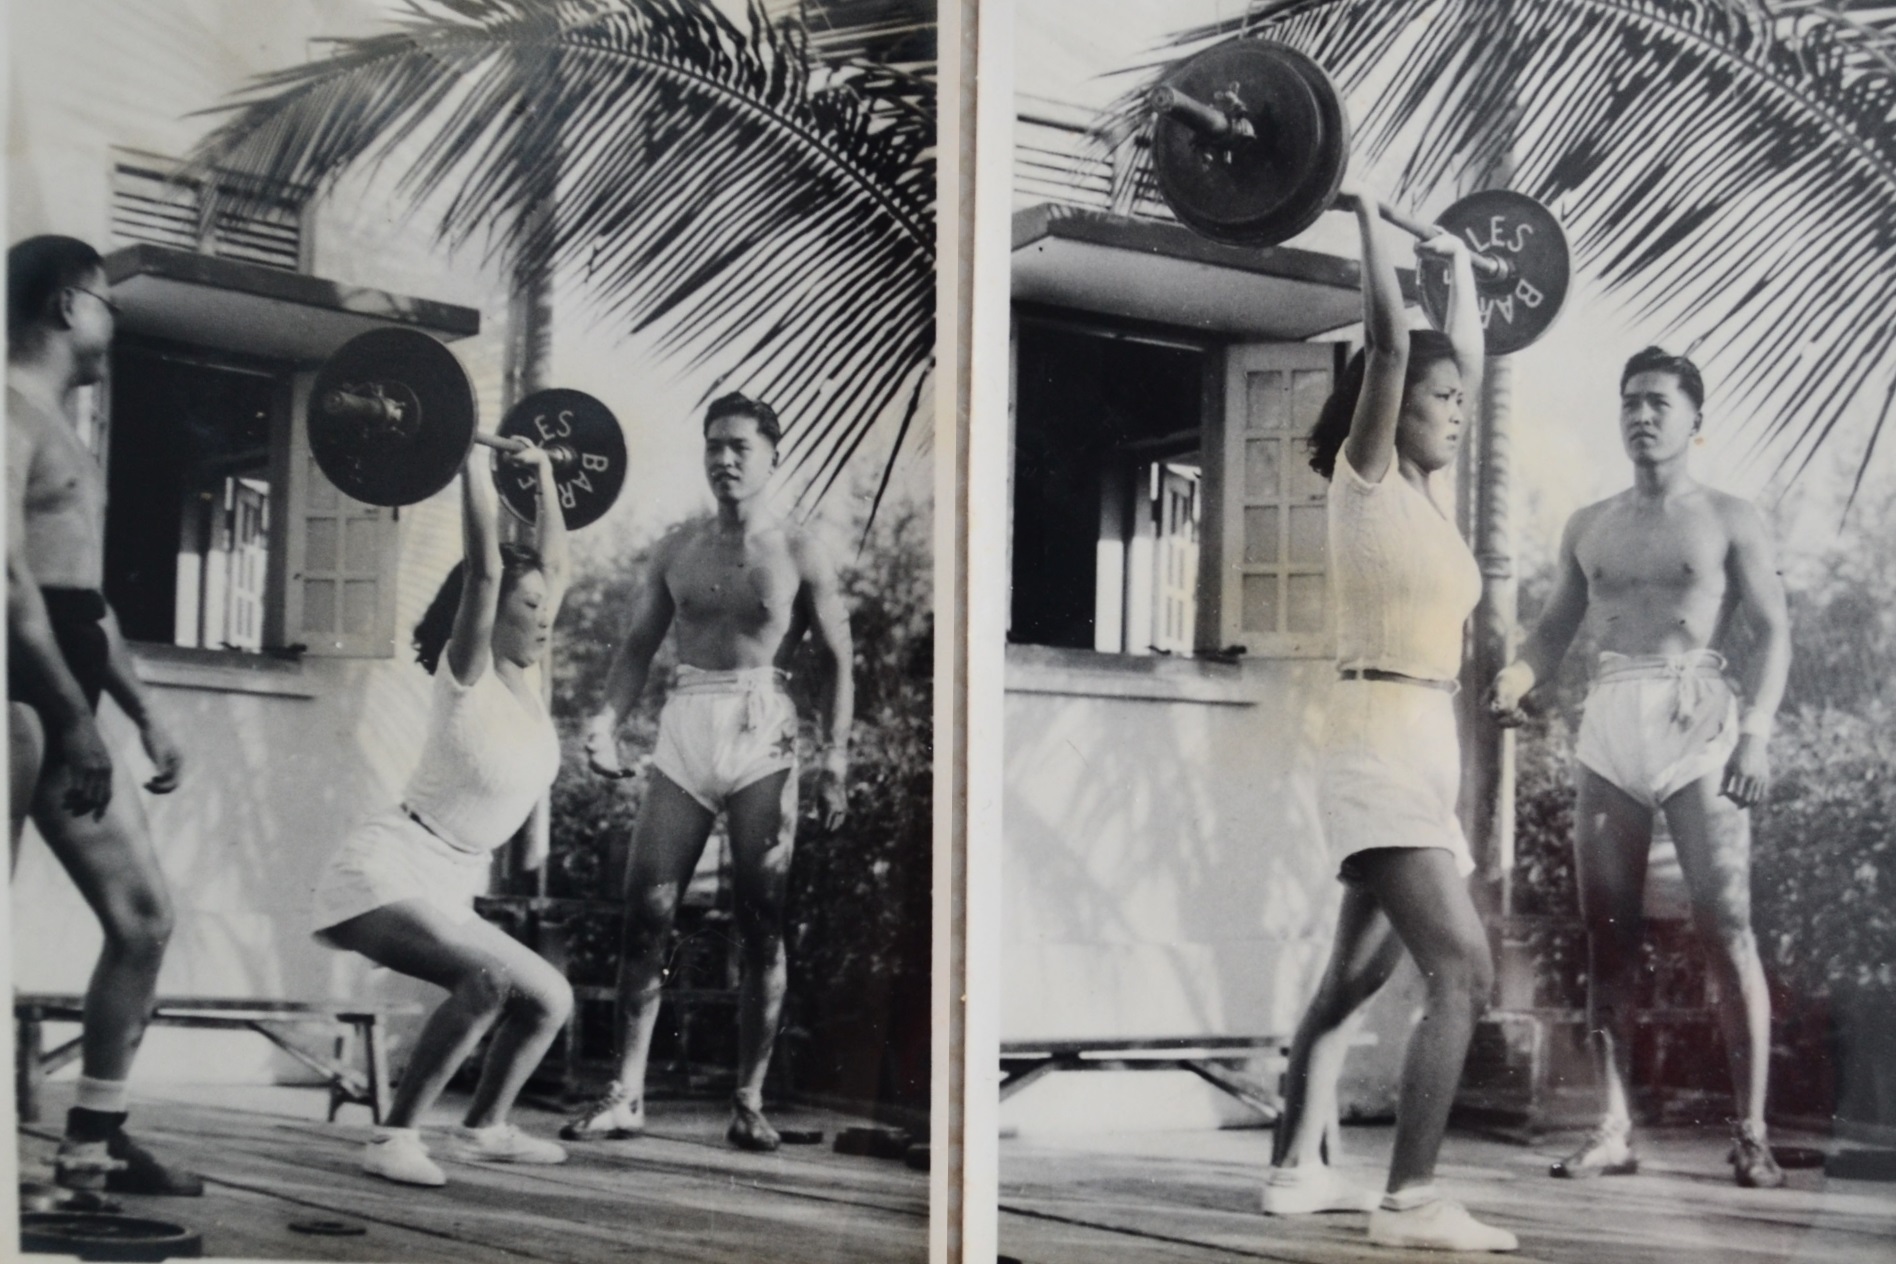 Madam Ho Lye Toh pictured weight lifting under the guidance of her brother (extreme right). She was thrust into the beauty pageant world by her father, who signed her up for Miss Singapore under the guise of a weight lifting demonstration.